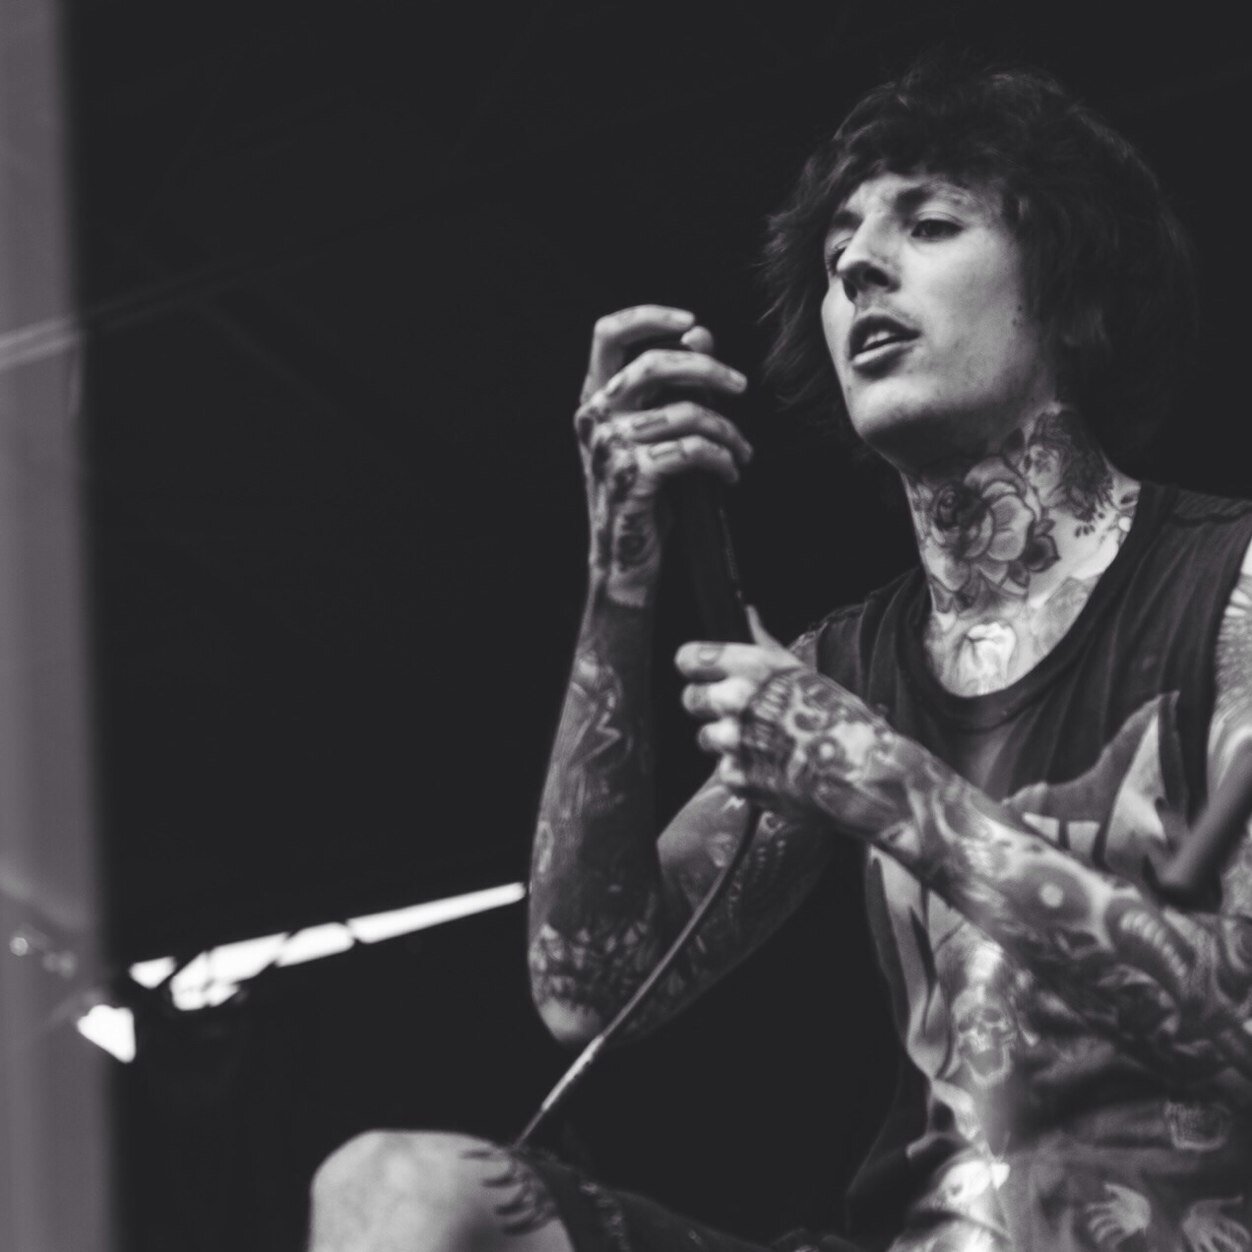 Hi this is Oli's timeline - @bmthcoven